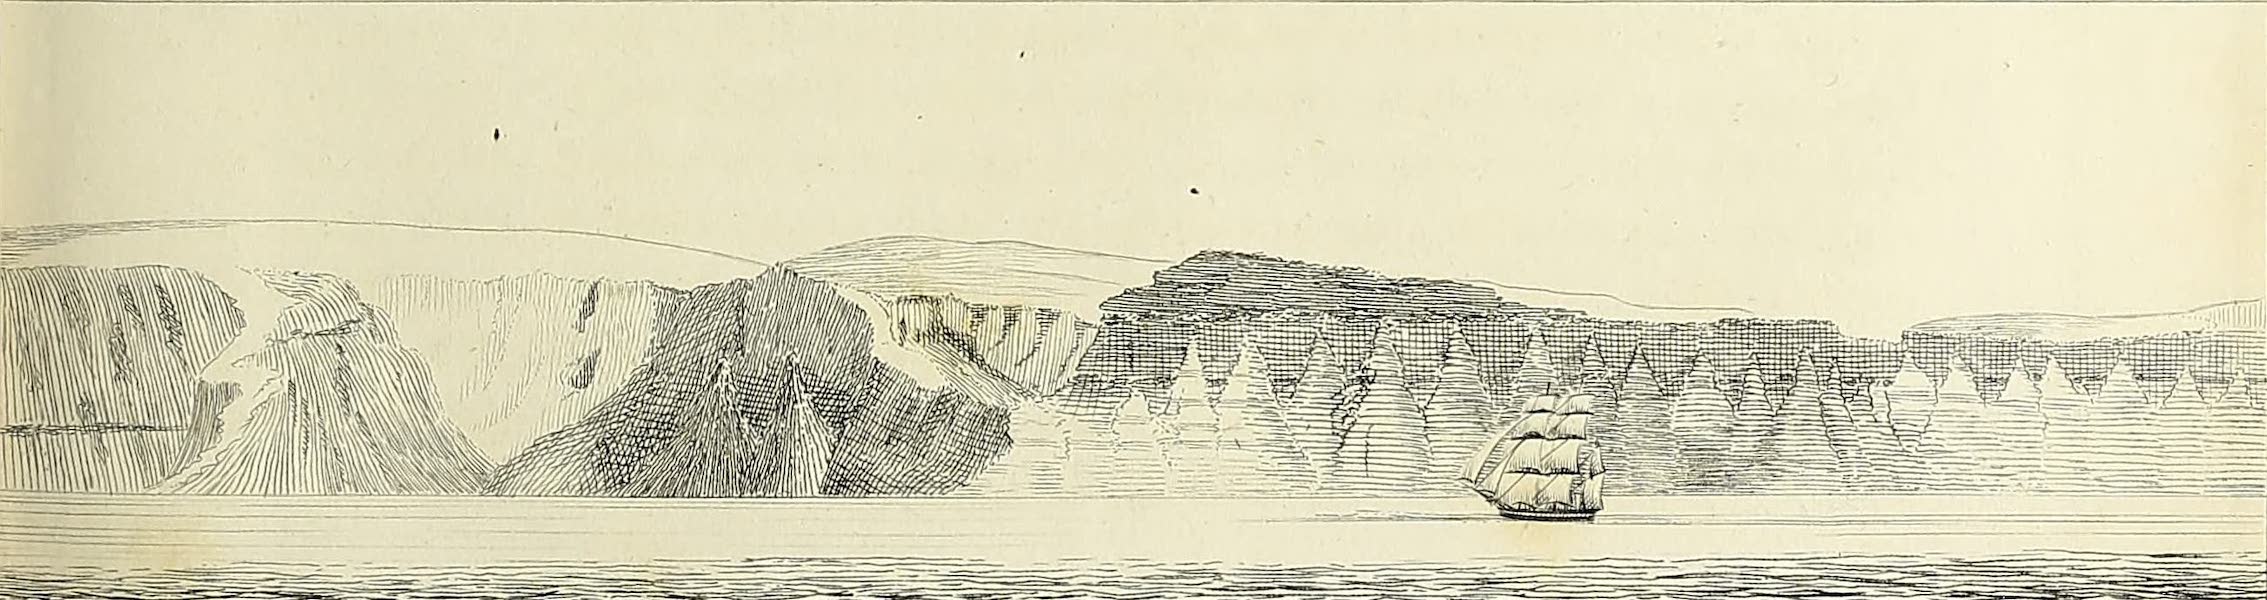 Journal of a Voyage for the Discovery of a North-West Passage - North Shore of Barrow's Strait, bearing North [II] (1821)